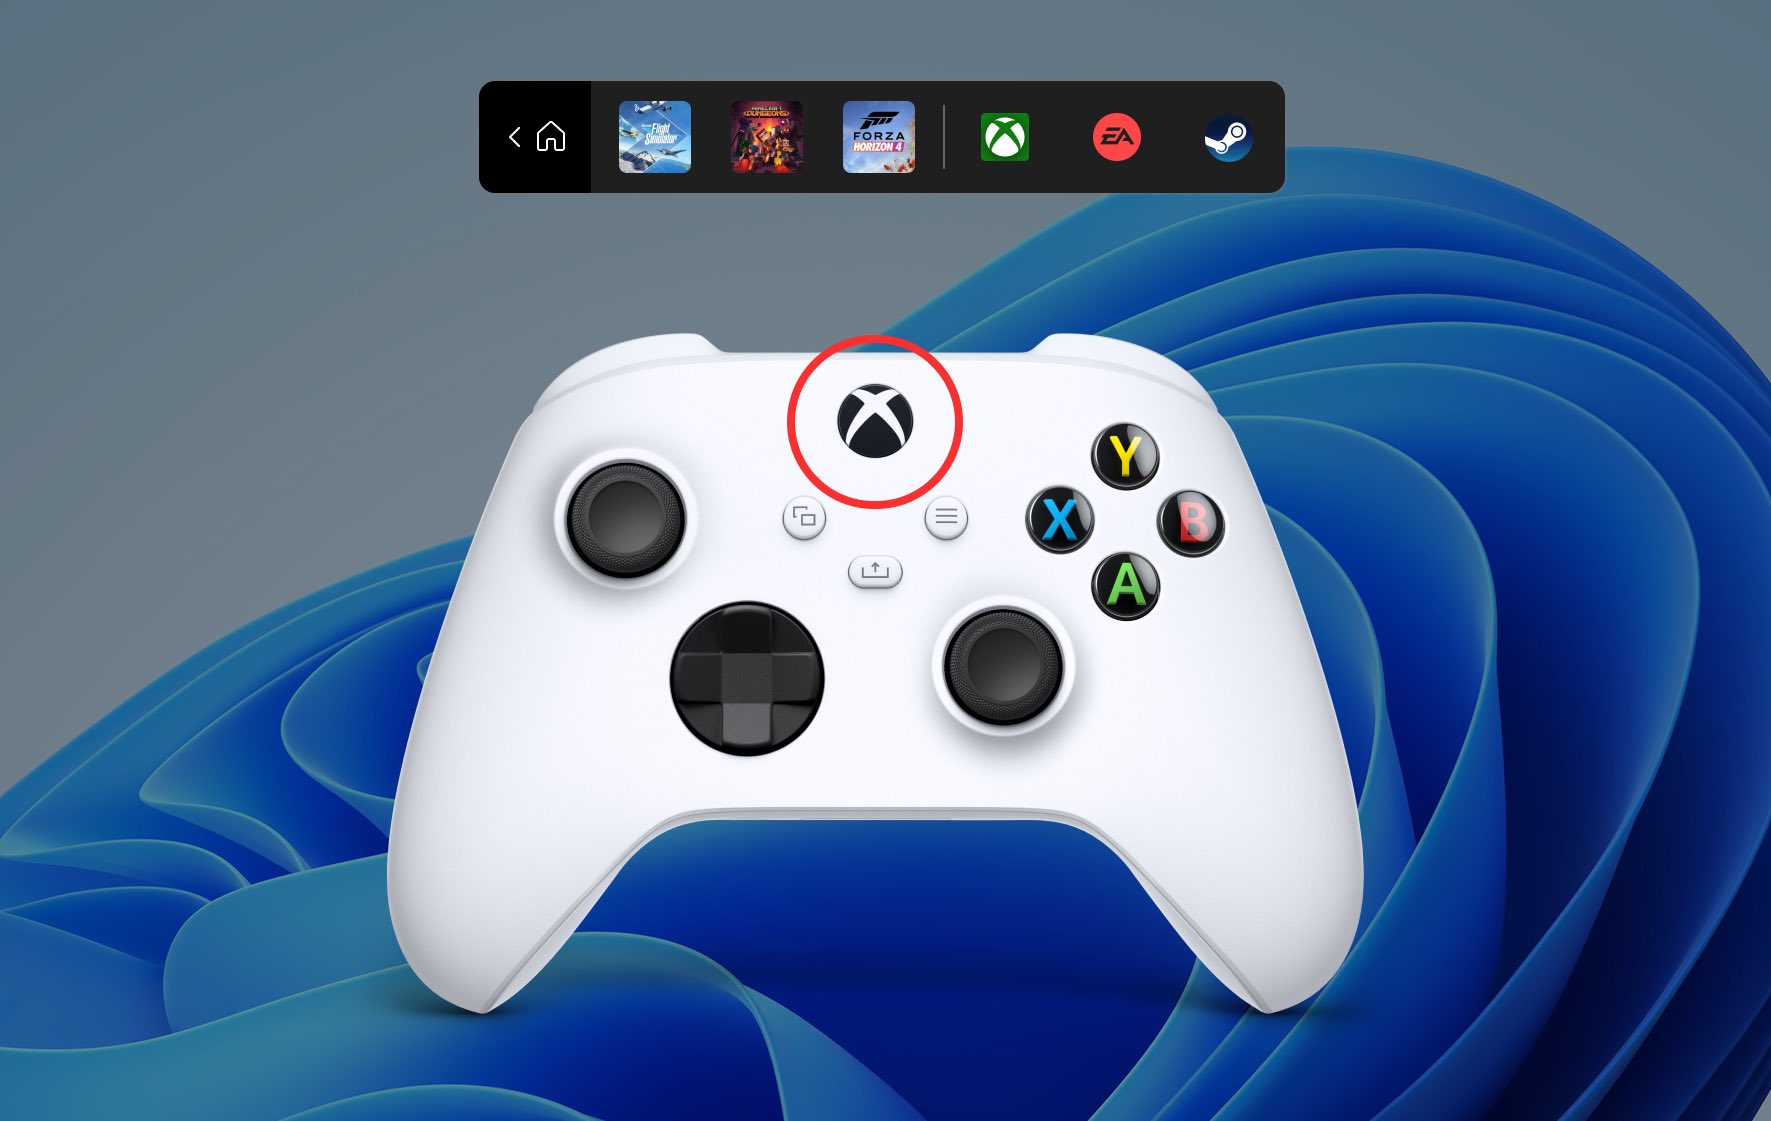 Tom Warren on Twitter: "this is the new Xbox controller bar for Windows 11.  It's a new view of the Xbox Game Bar that has controller-friendly access to  recently played games, Steam,